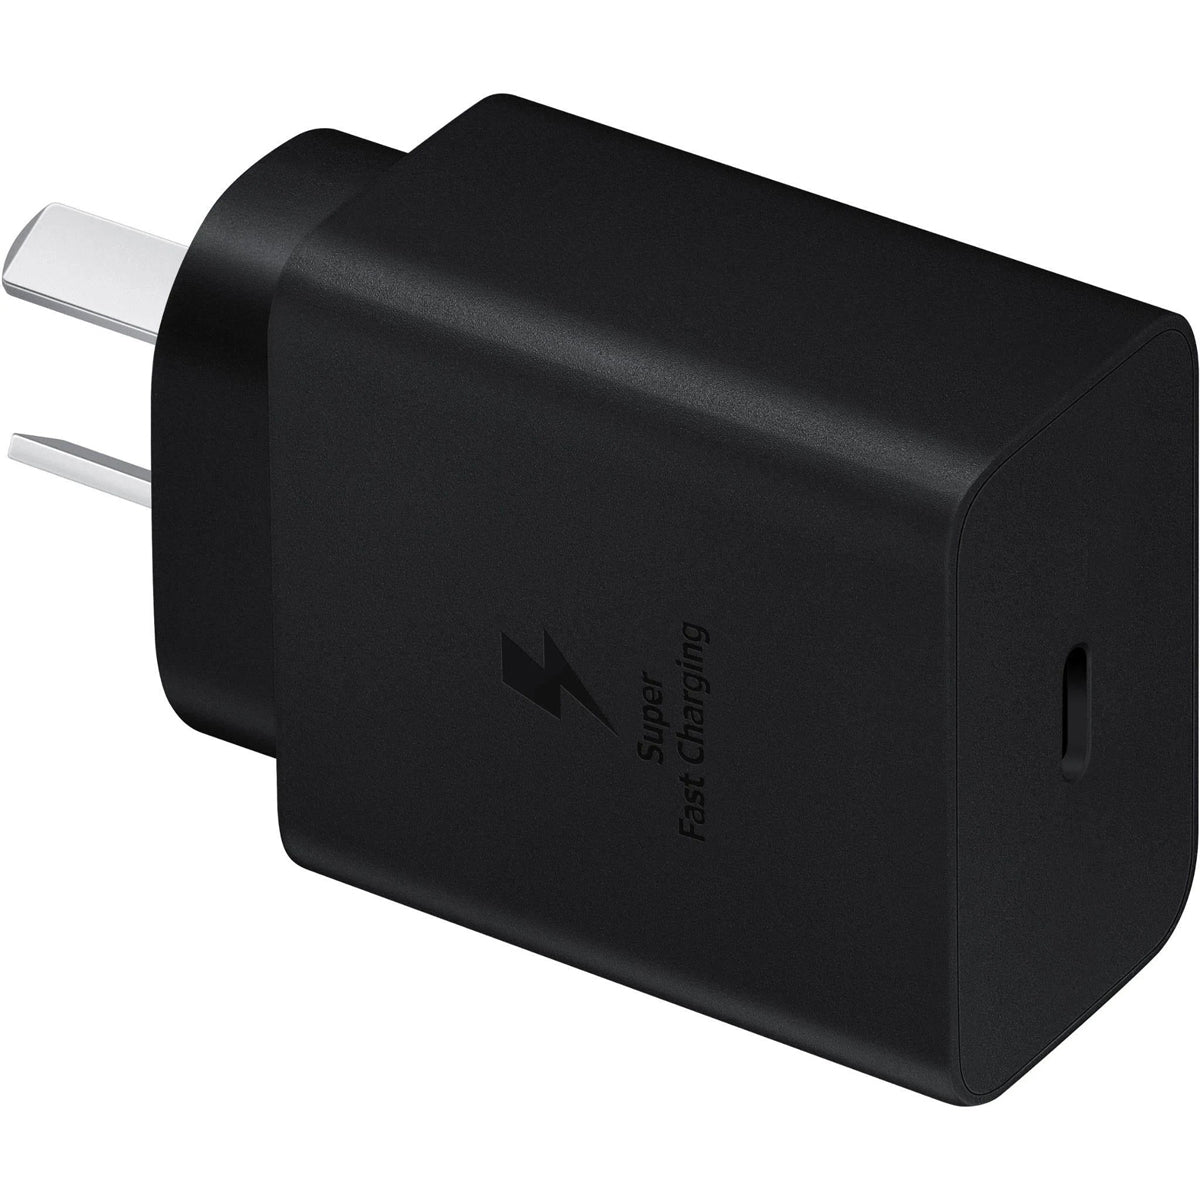 Samsung AC Charger with USB-C to USB-C Cable - 50W - Black